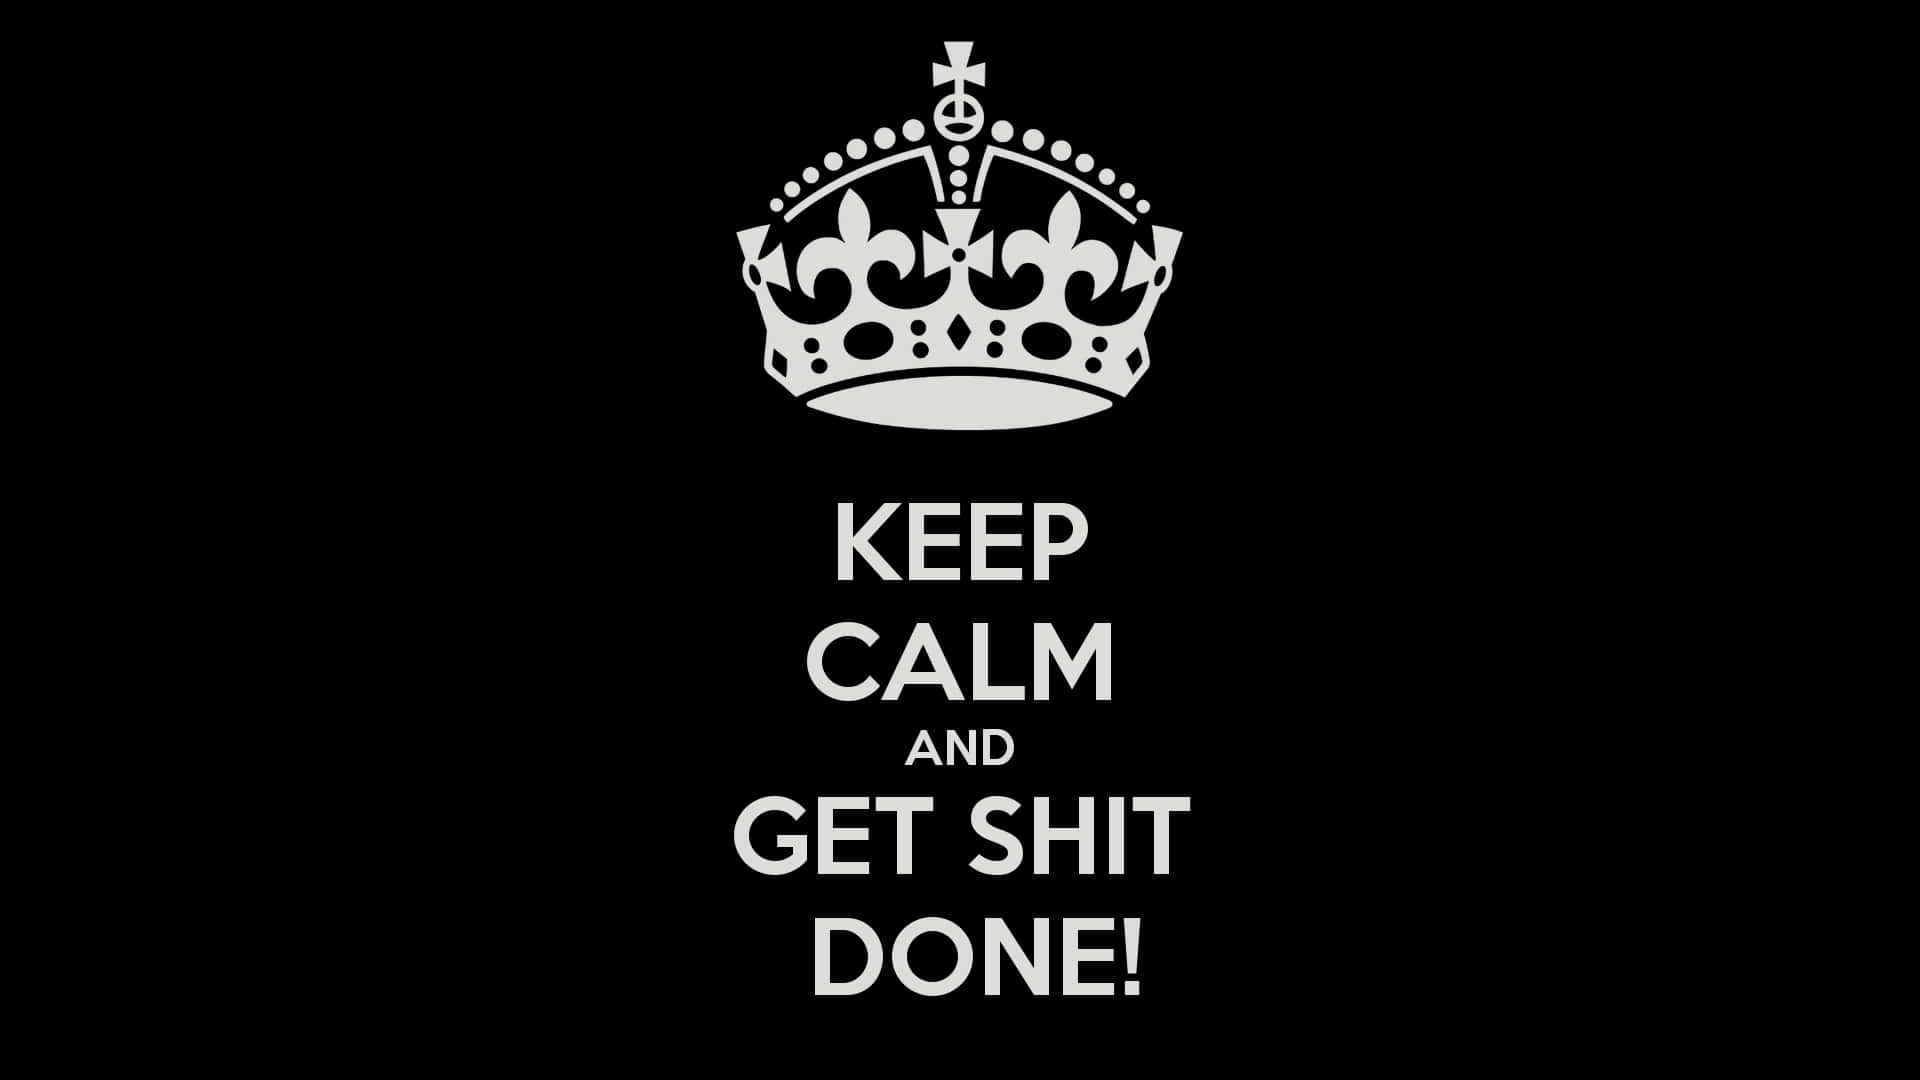 Keep Calm And Get Shit Done By Sassy - Hd Wallpaper Wallpaper